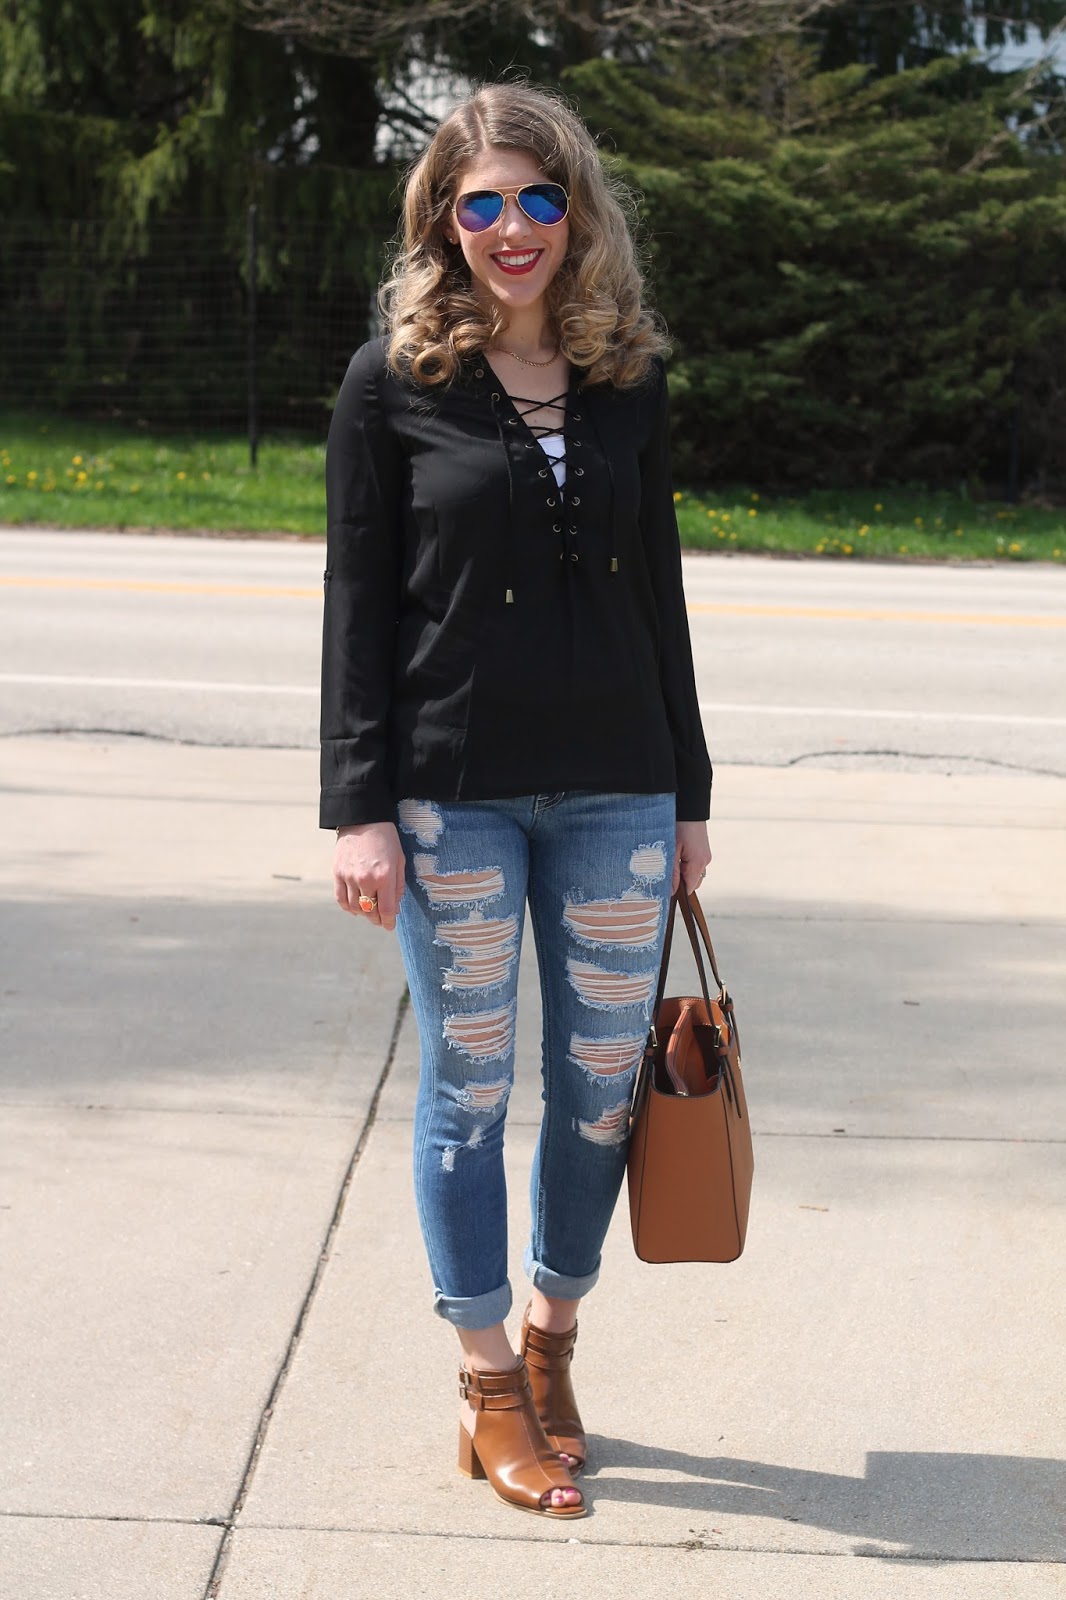 Lace Up Top & Confident Twosday Linkup